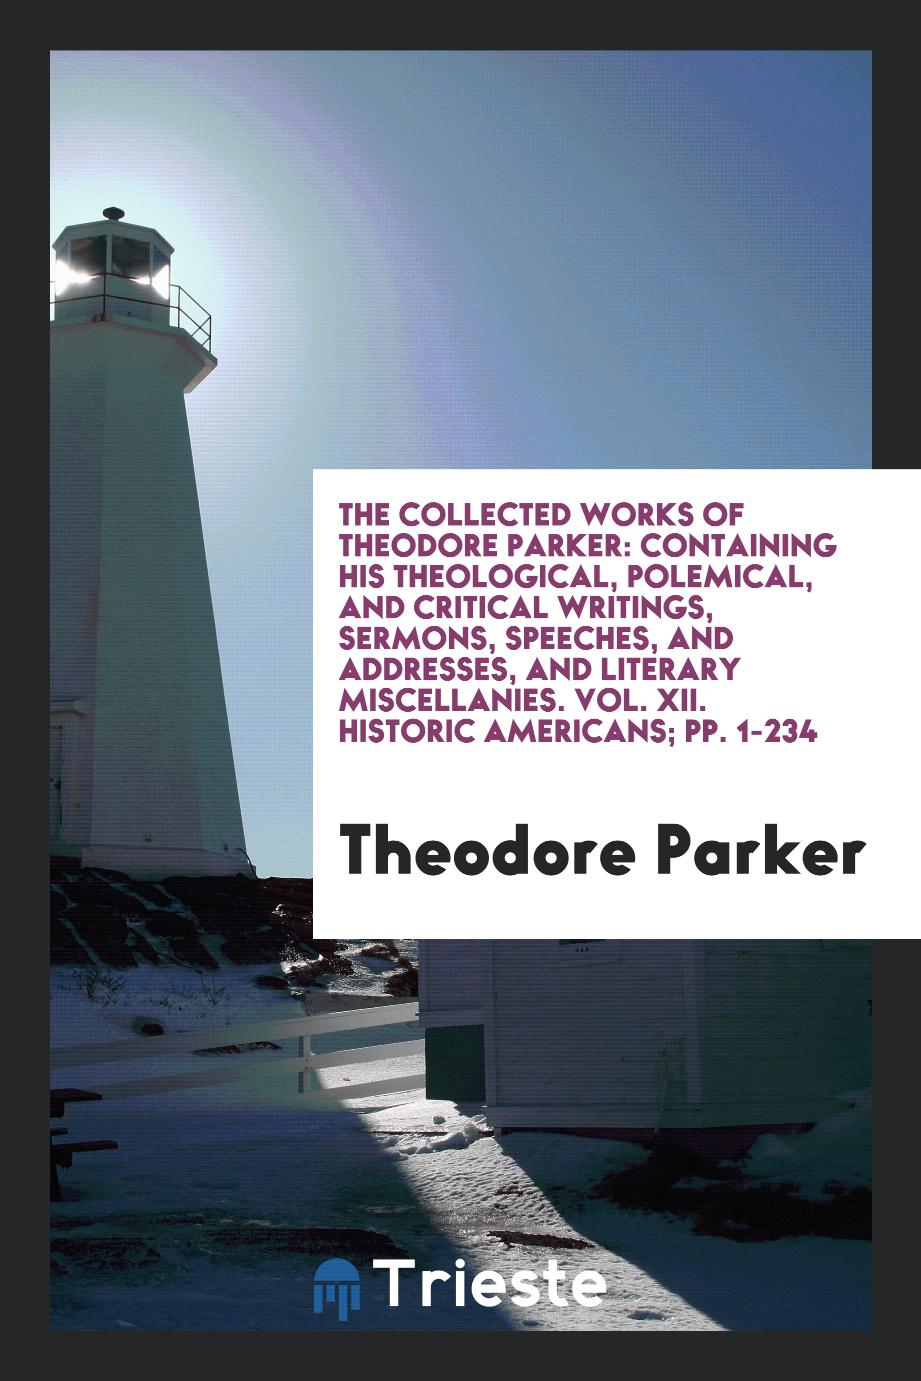 The Collected Works of Theodore Parker: Containing His Theological, Polemical, and Critical Writings, Sermons, Speeches, and Addresses, and Literary Miscellanies. Vol. XII. Historic Americans; pp. 1-234